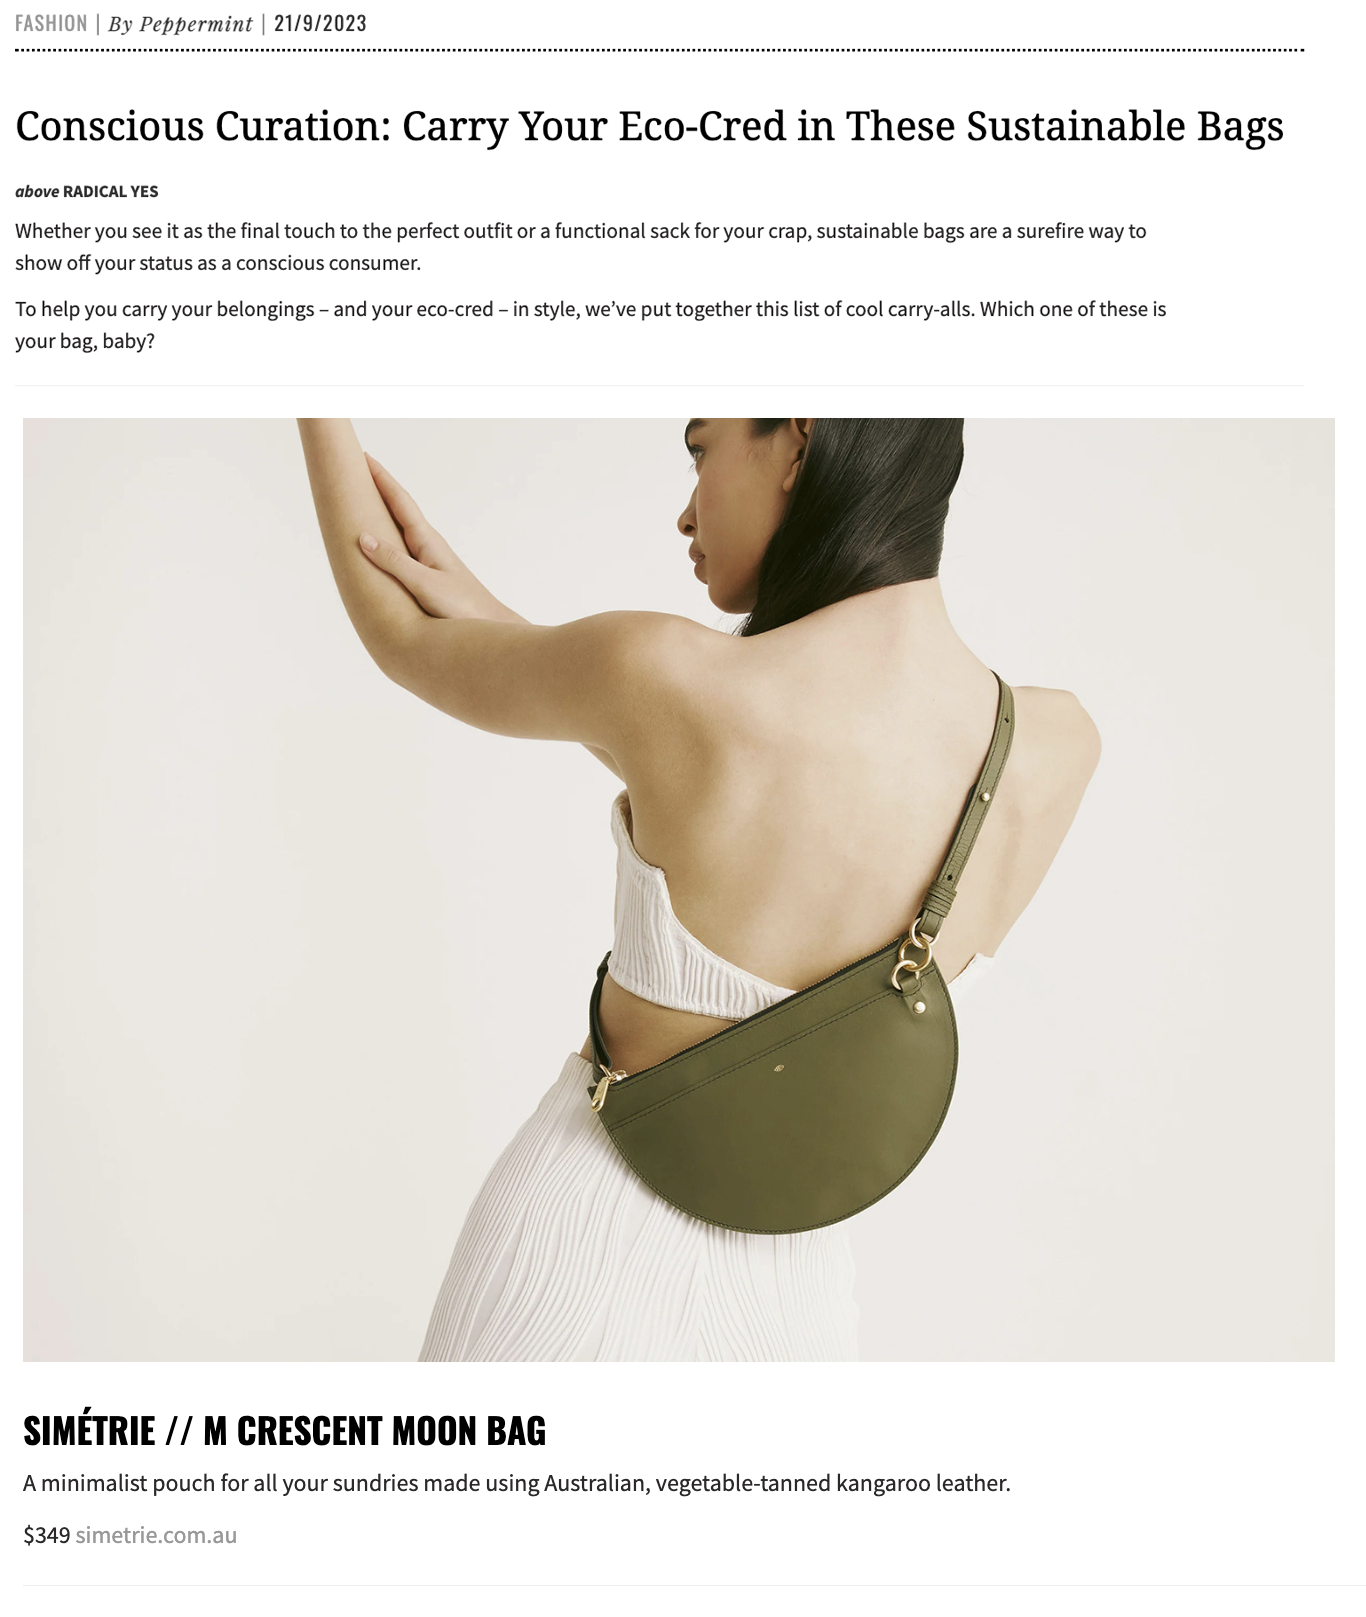 A clip out of a press article from Peppermint Magazine. Titled: Conscious Curation - Carry Your Eco-Cred in these Sustainable Bags.